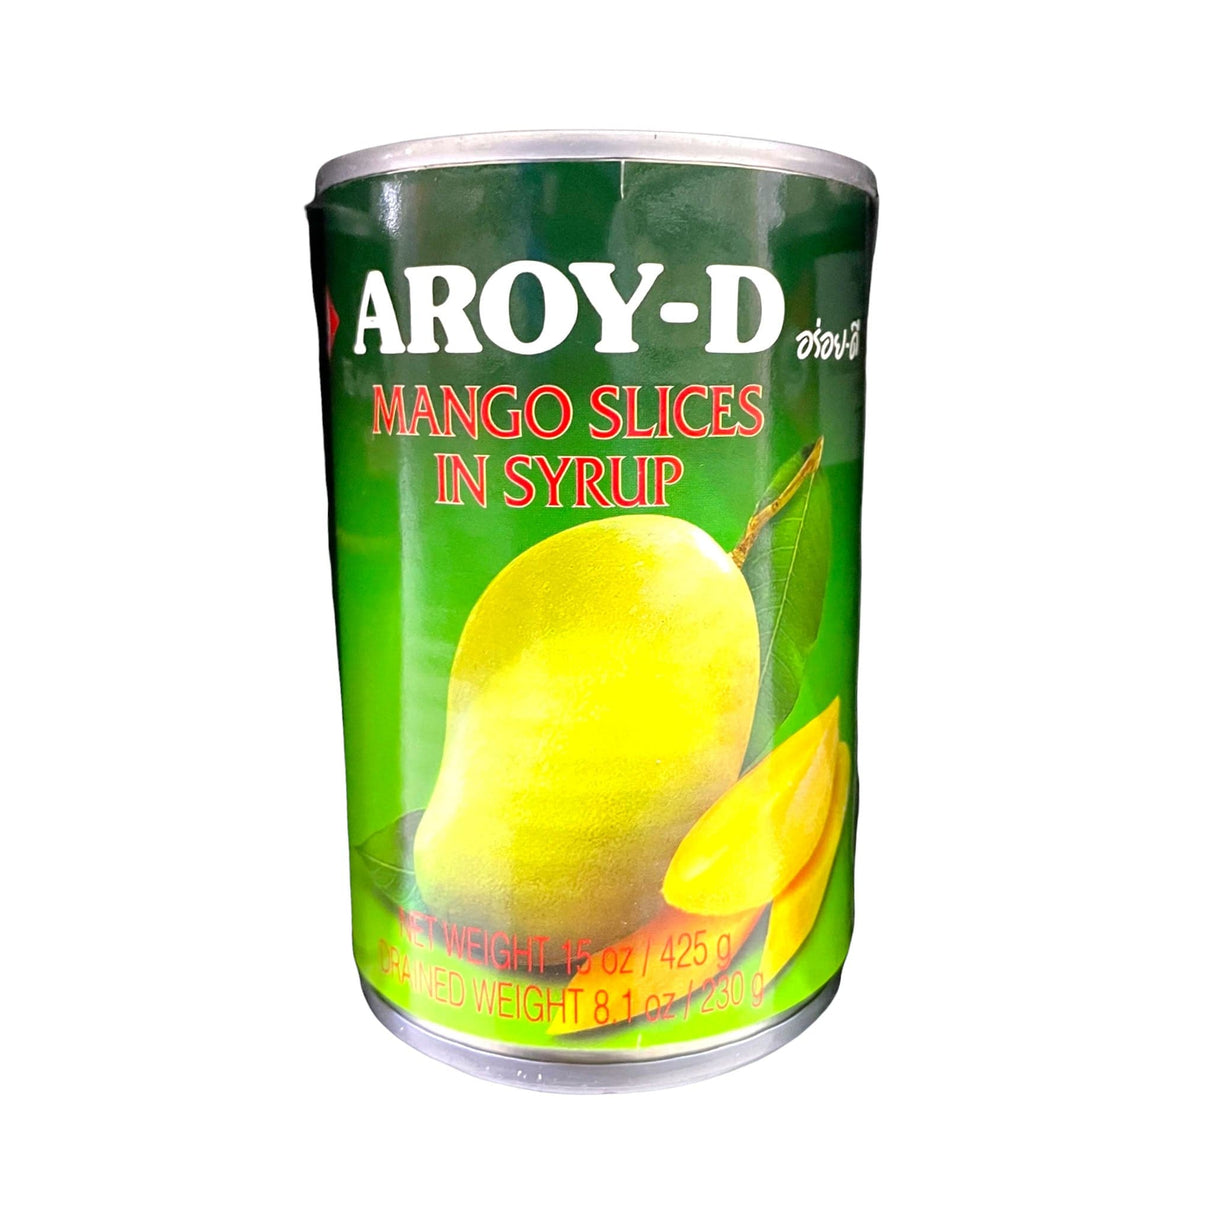 Aroy-d Mango Slices in Syrup